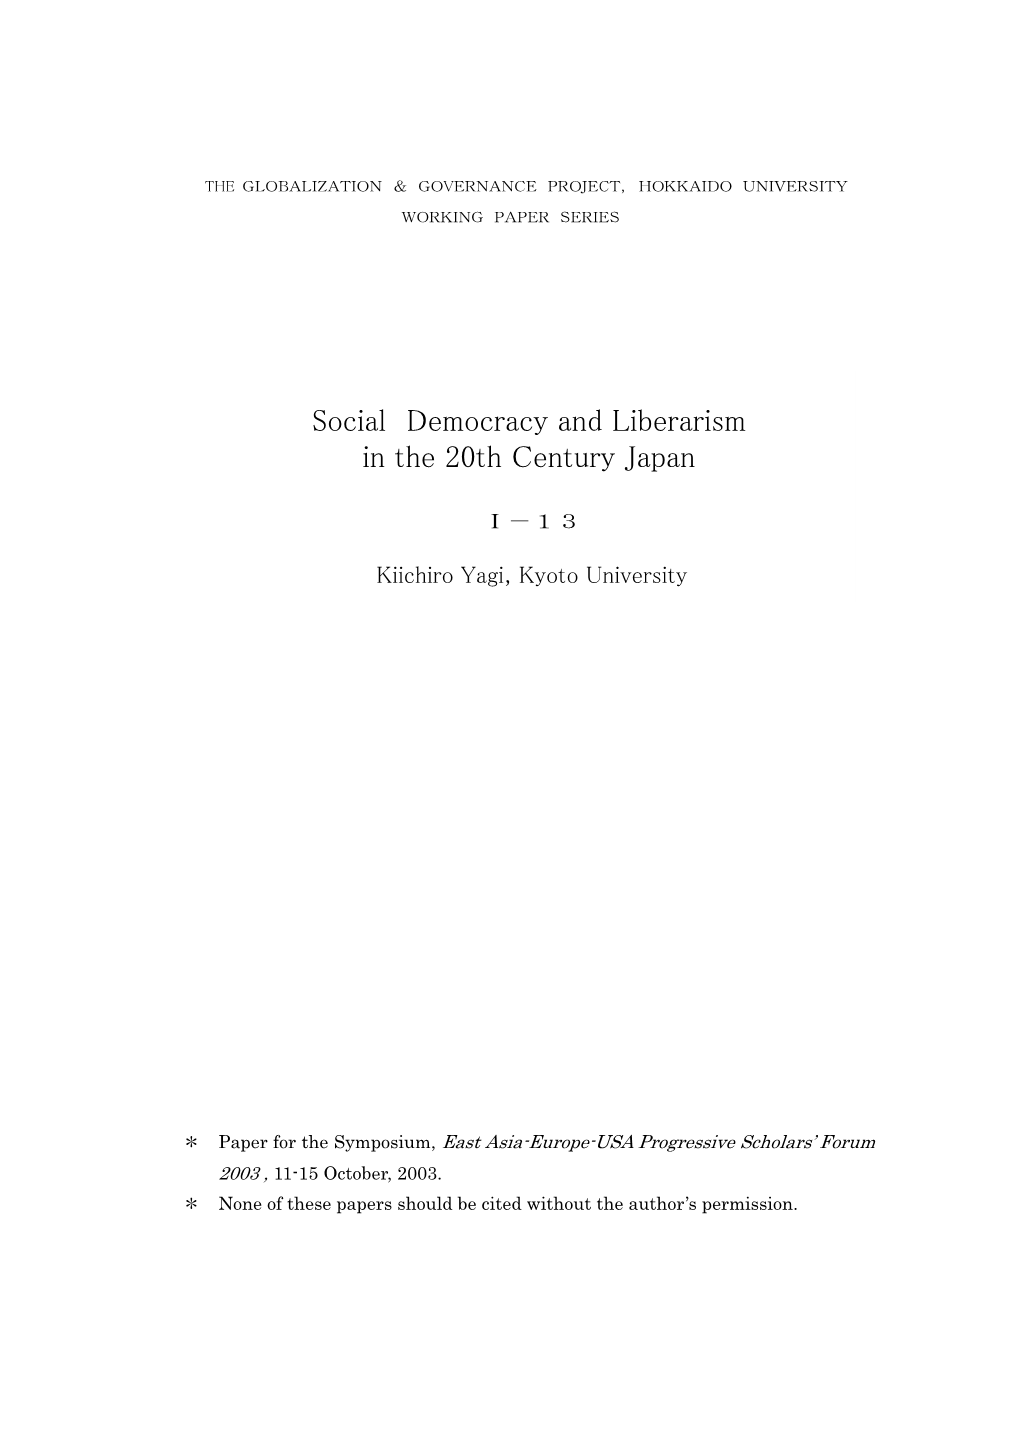 Social Democracy and Liberarism in the 20Th Century Japan